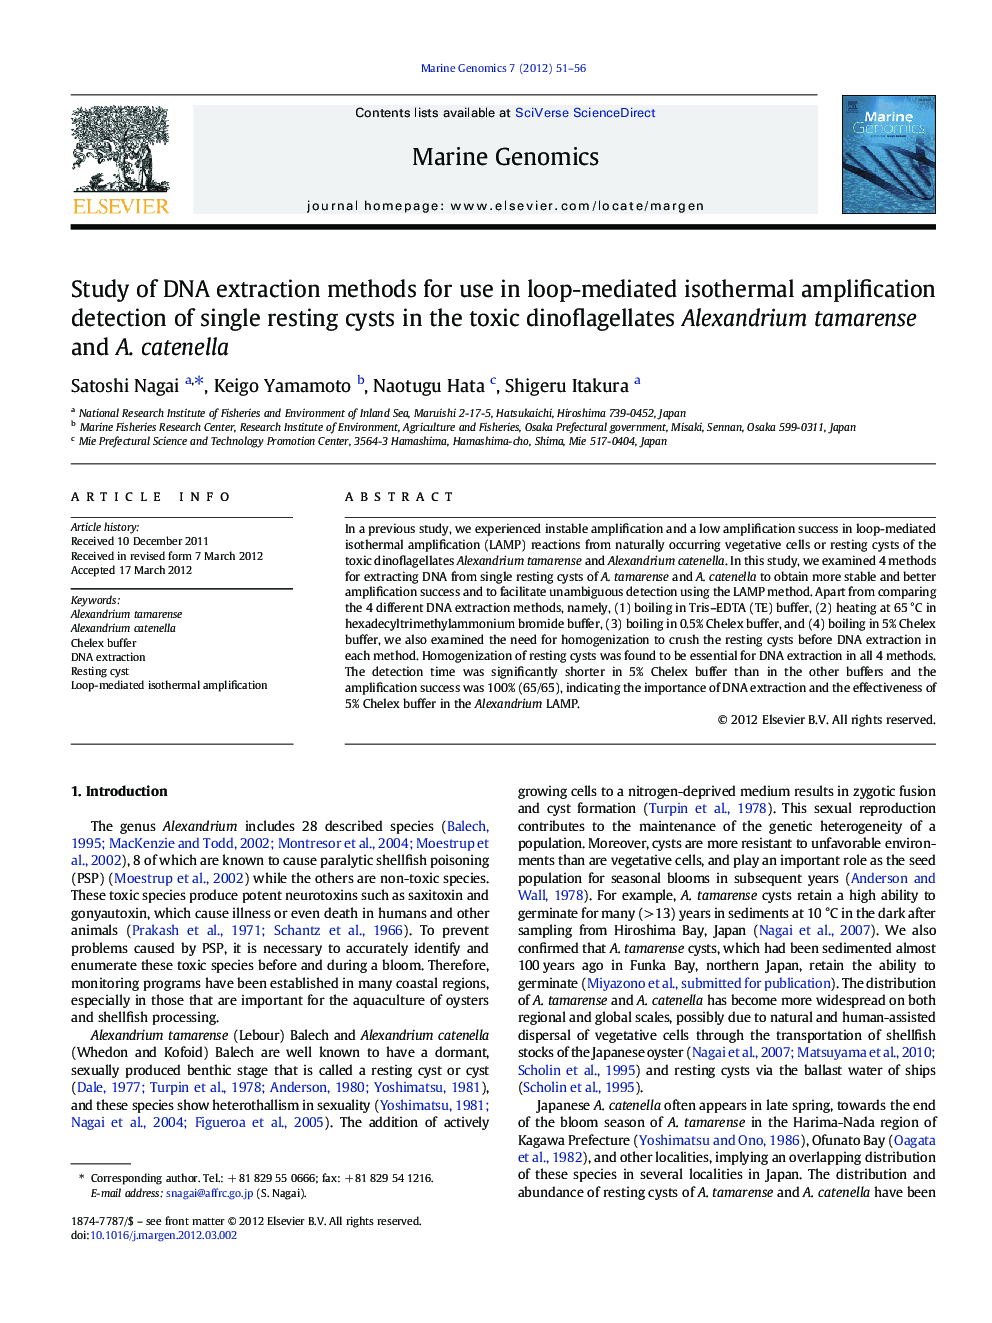 Study of DNA extraction methods for use in loop-mediated isothermal amplification detection of single resting cysts in the toxic dinoflagellates Alexandrium tamarense and A. catenella